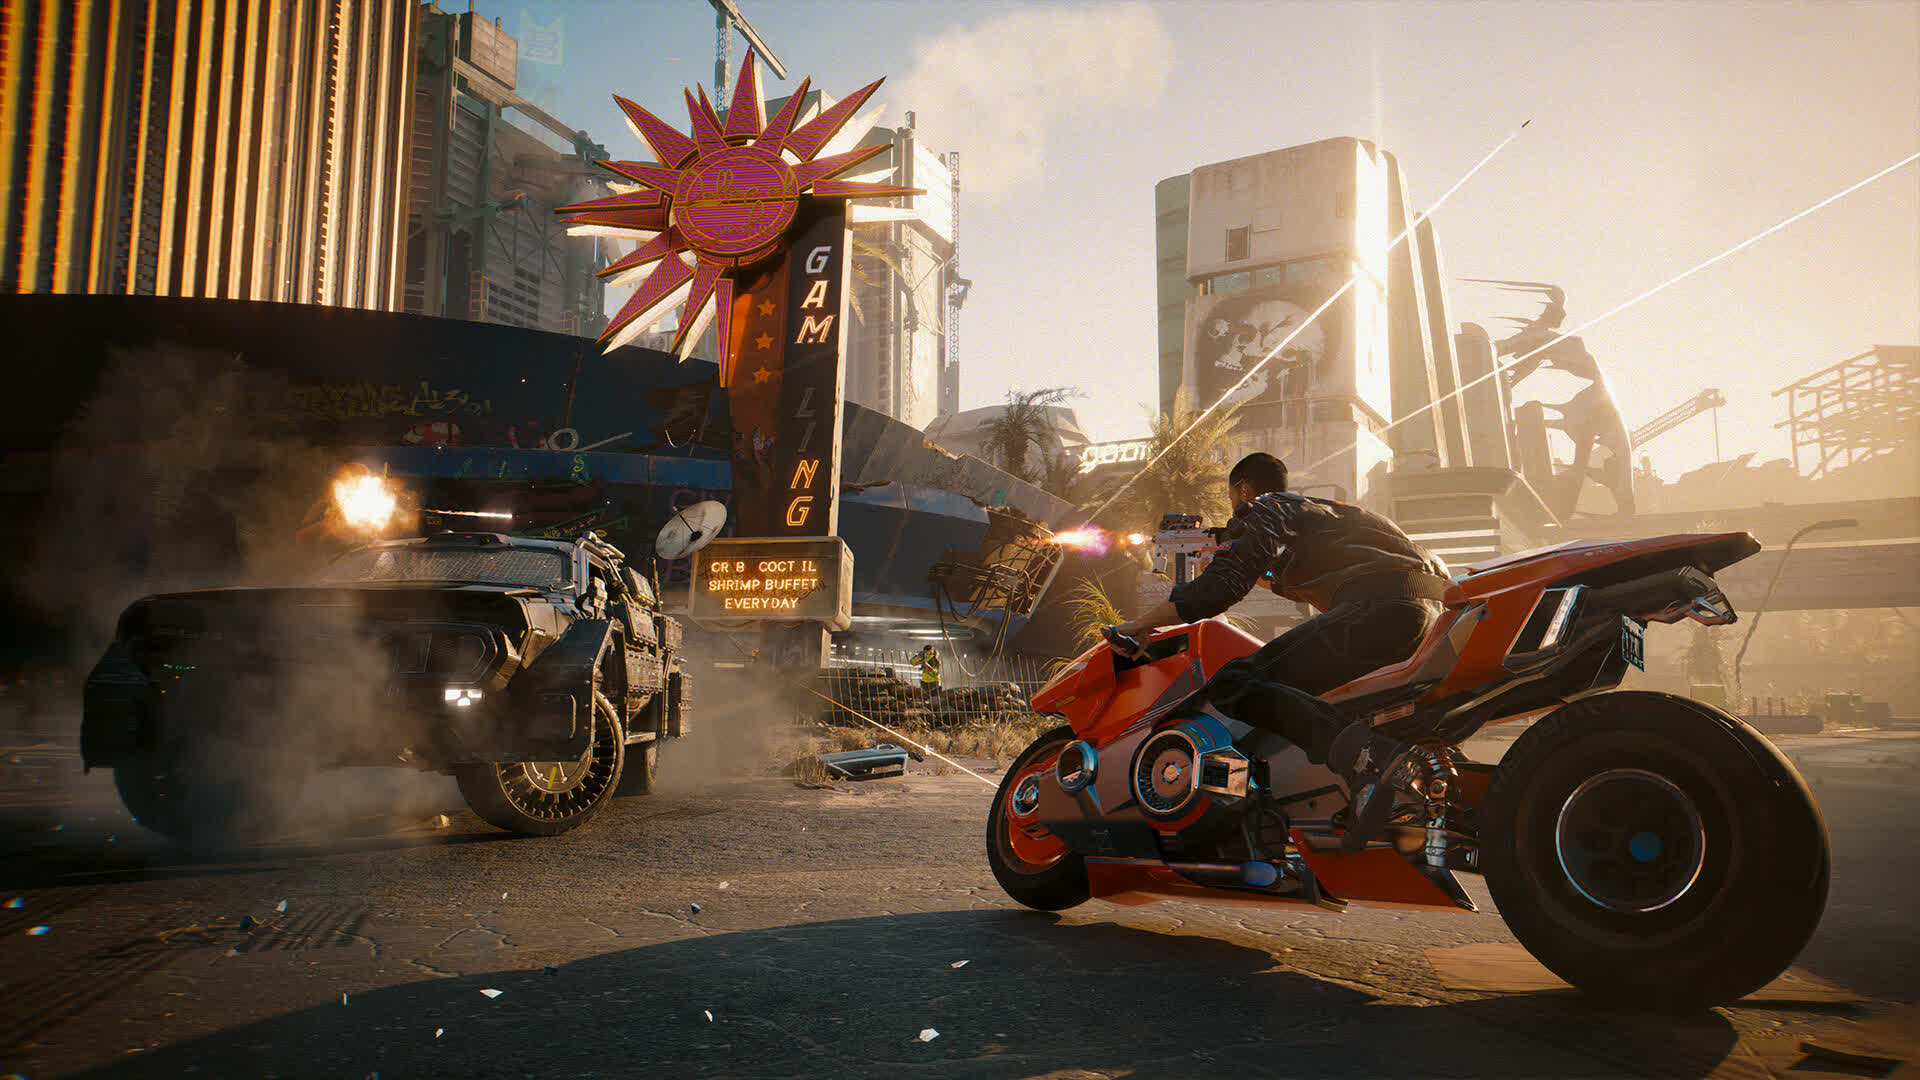 Cyberpunk 2077 has climbed to an 80 percent very positive rating on Steam